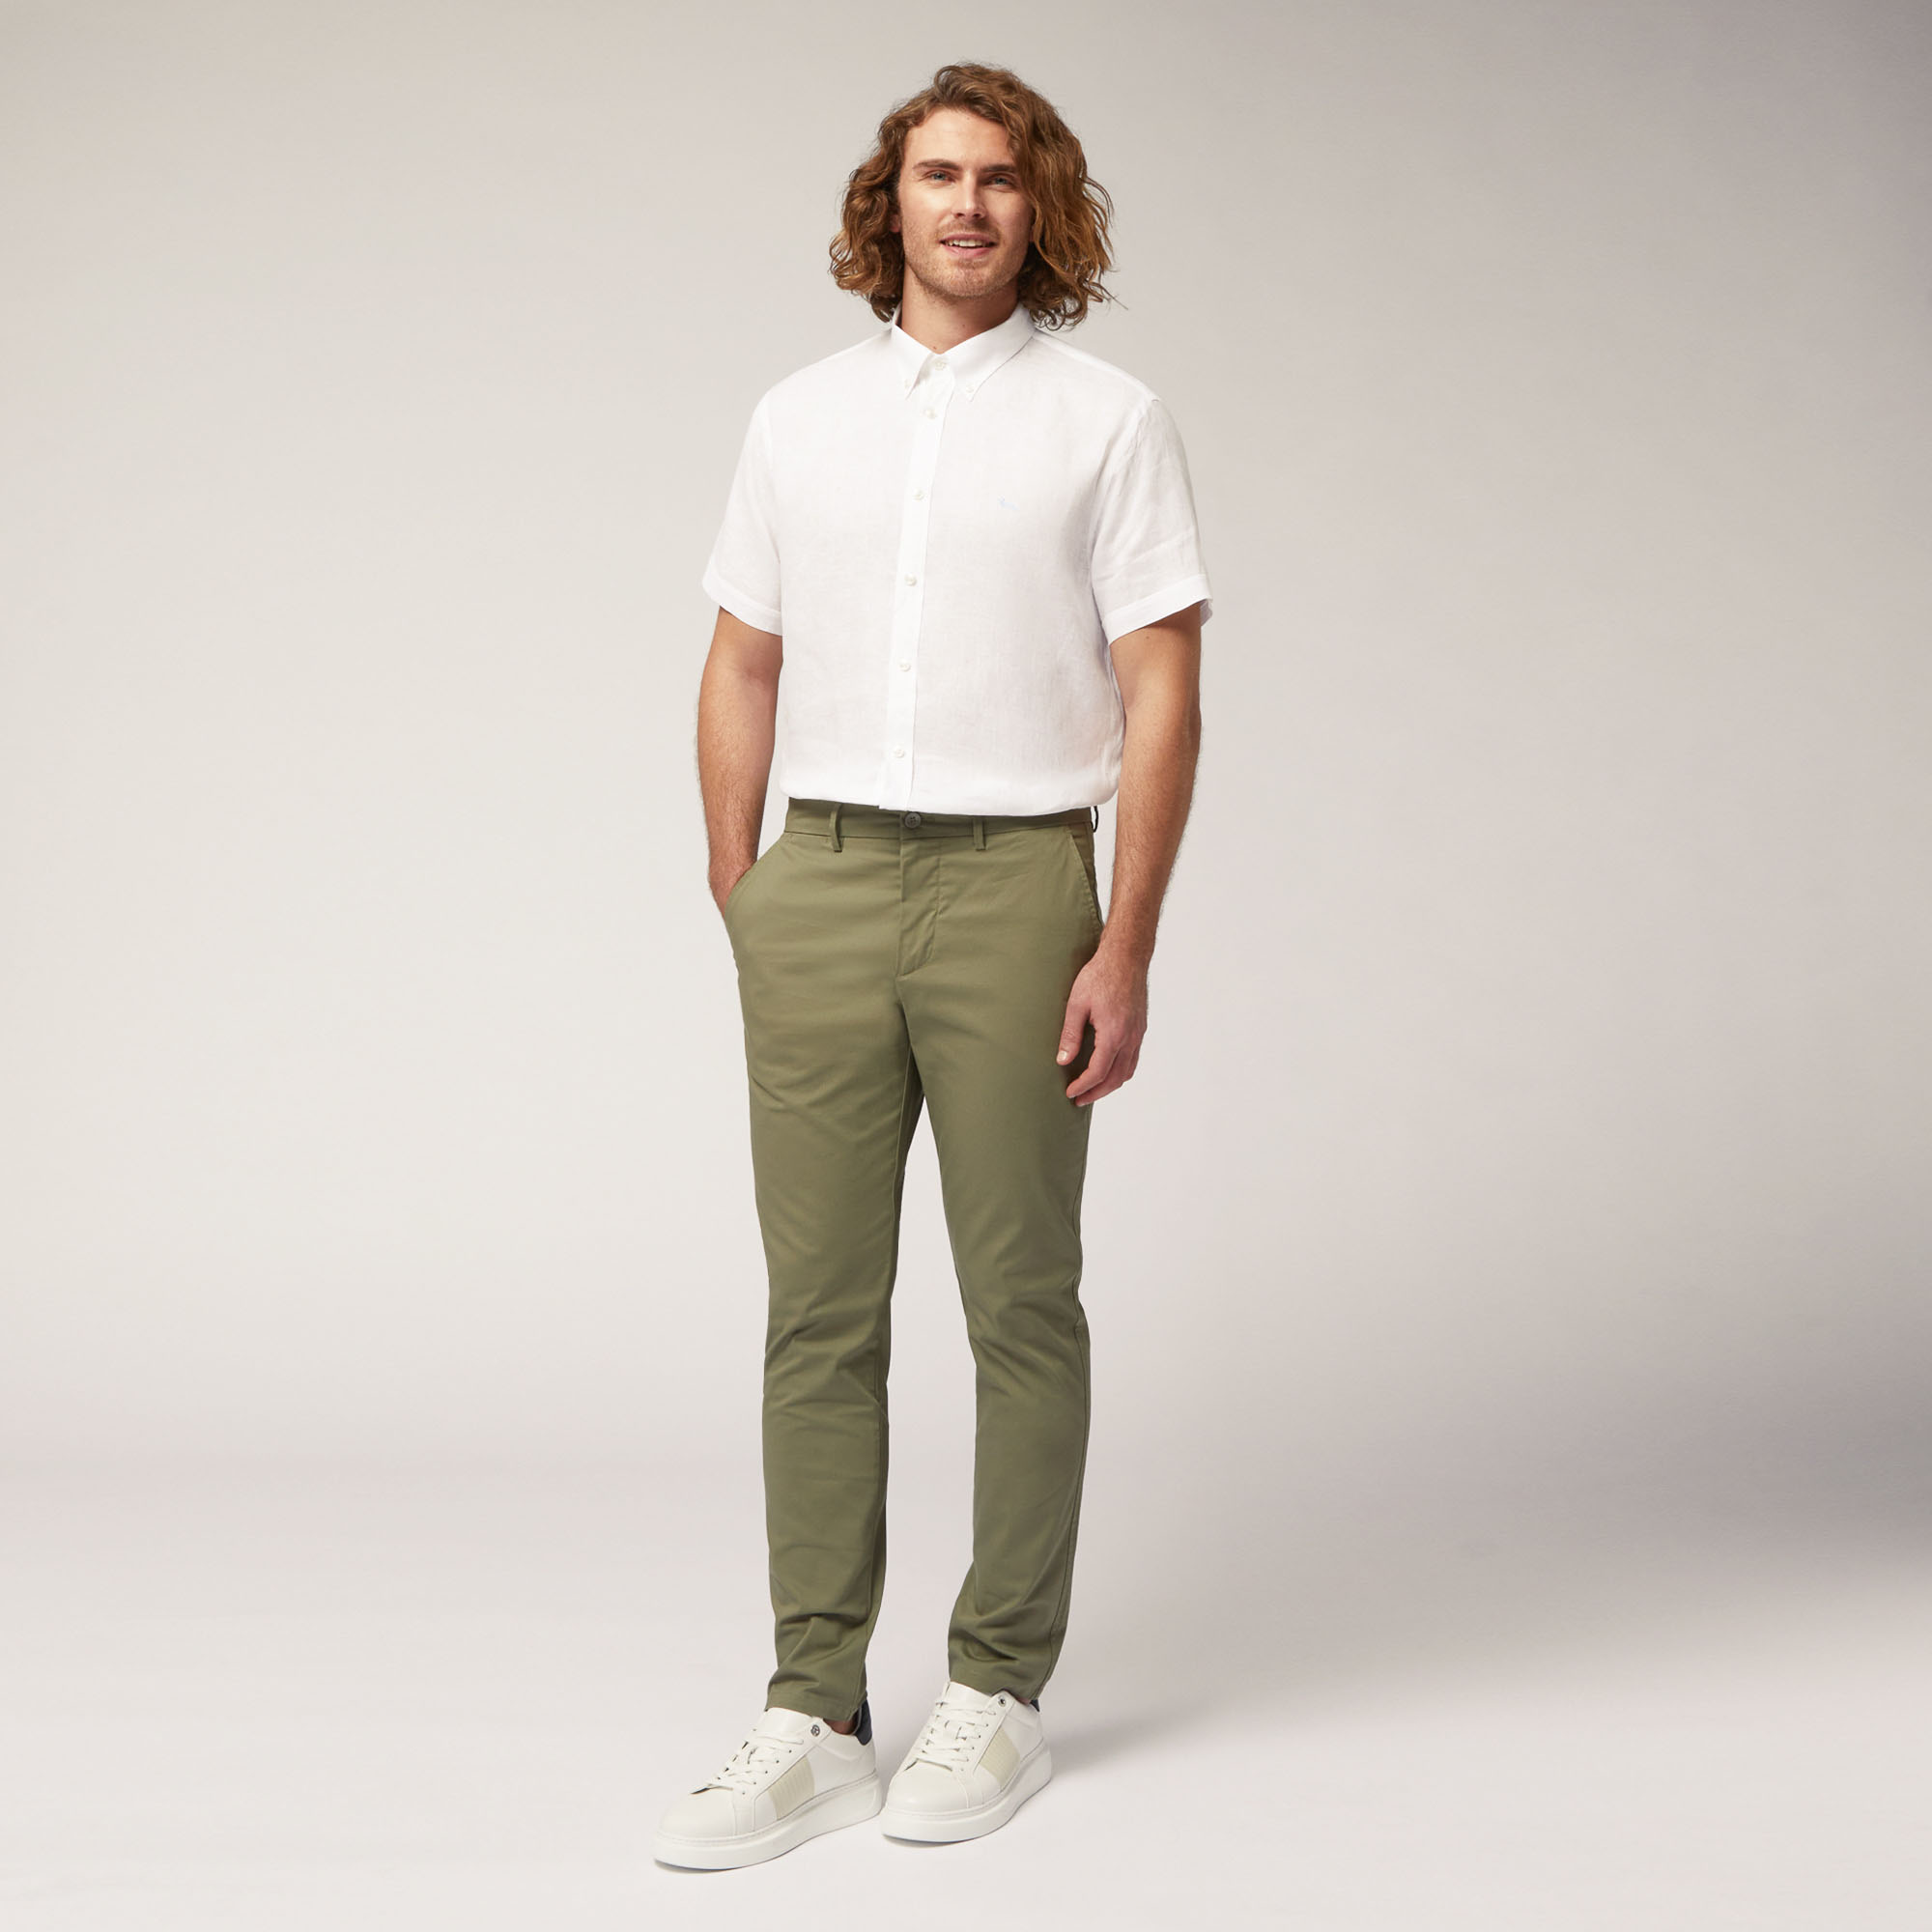 Narrow Fit Chino Pants, Green, large image number 3